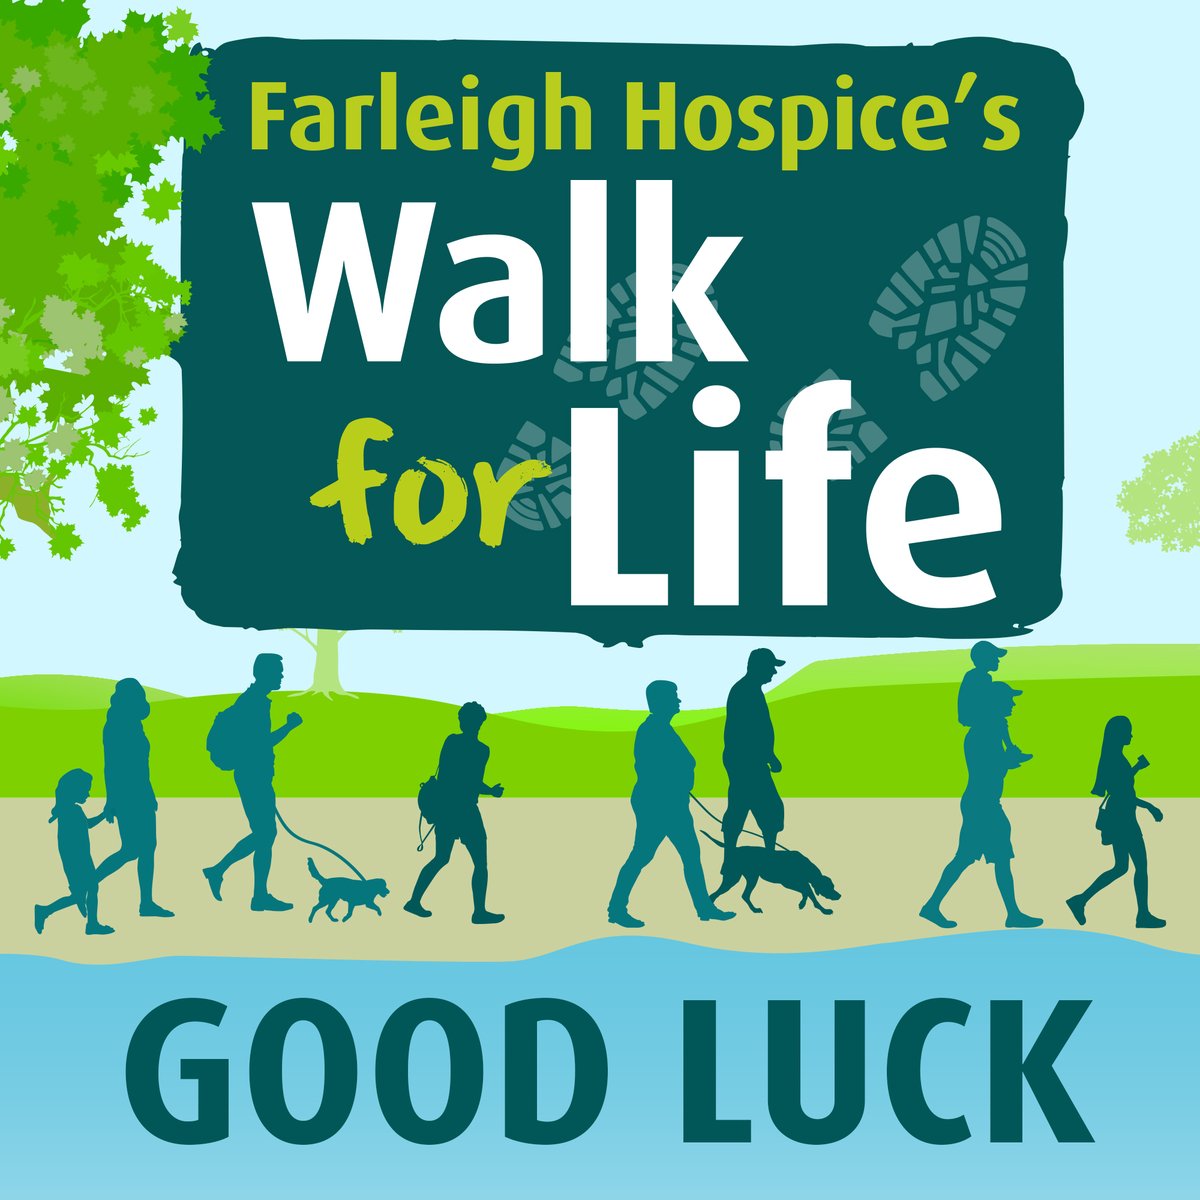 Good luck to all our walkers taking part in Walk for Life today for Farleigh Hospice. We hope you have a fabulous day! Find our Walk for Life branded selfie frame on the route and share your photos on social media - don't forget to use the hashtag #Farleighwalkforlife🚶☀️💛